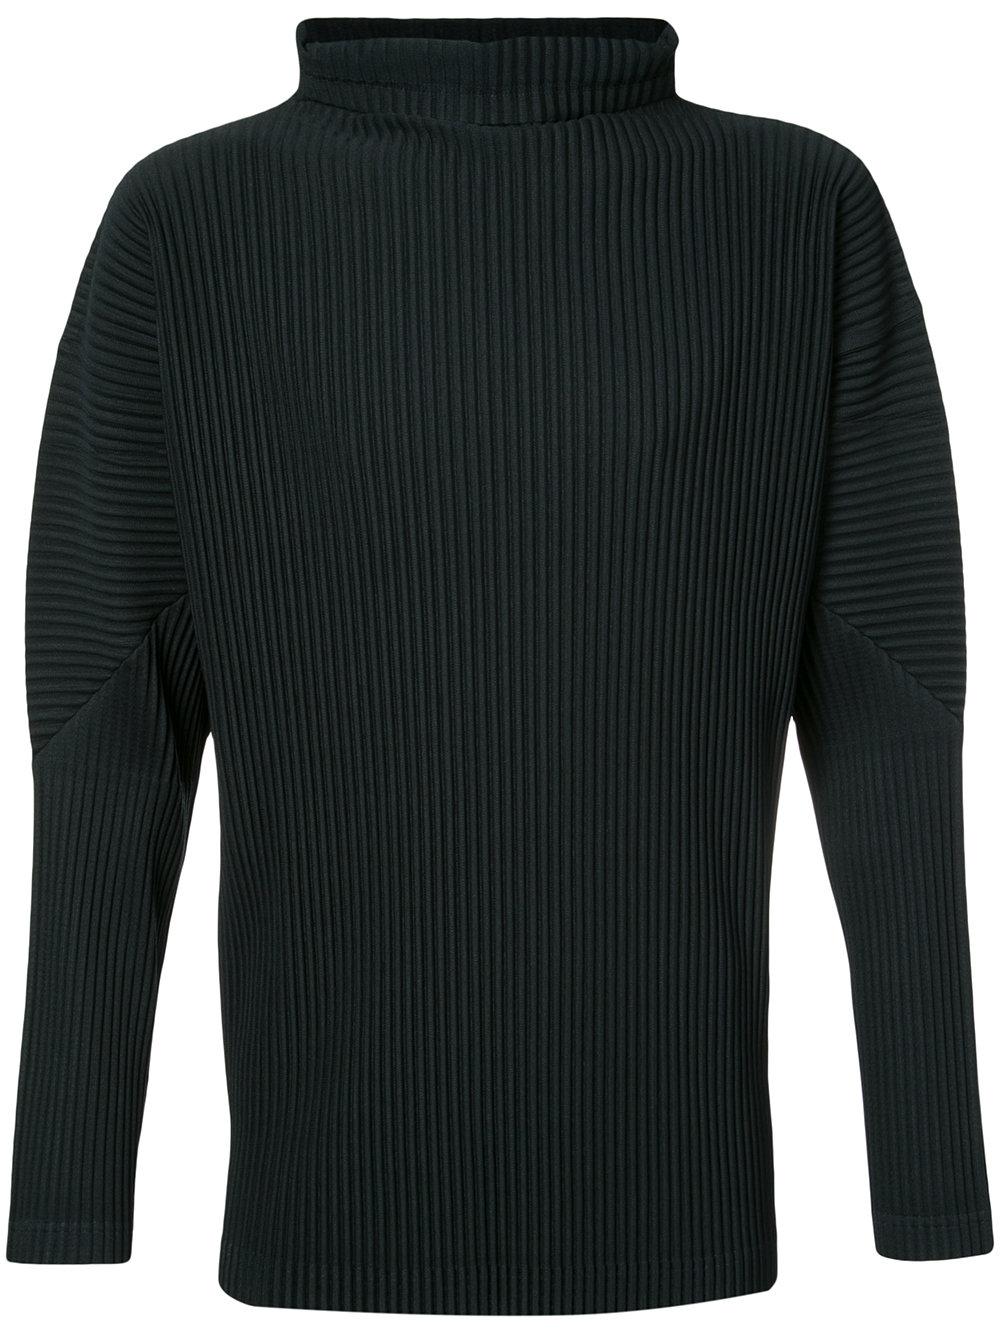 Homme Plissé Issey Miyake Synthetic Turtleneck Top in Black for Men - Lyst